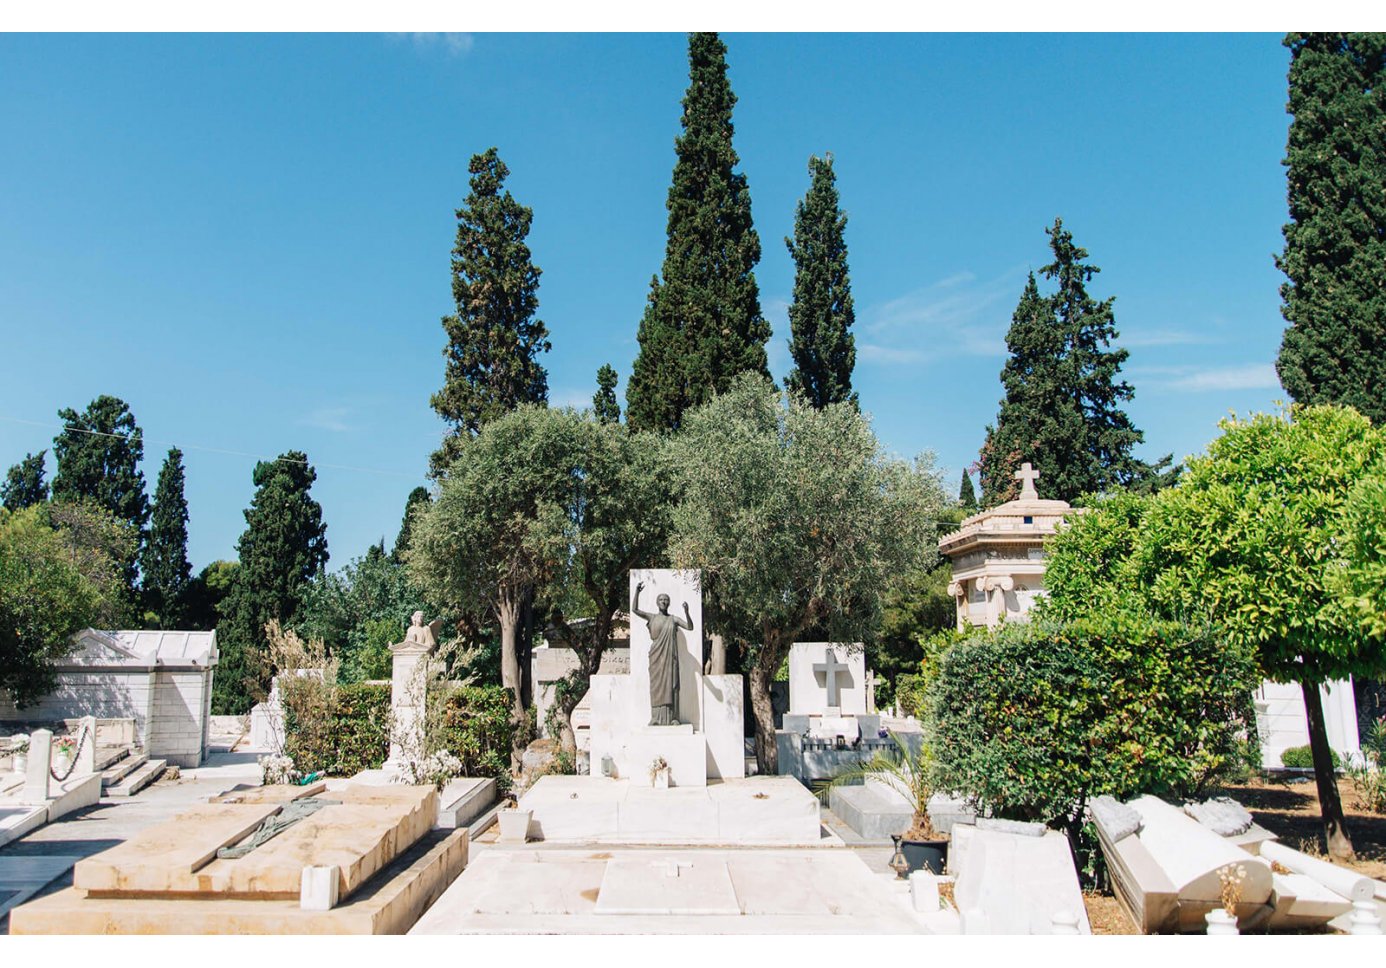 marble graves, pine trees, olive trees and bitter lemon trees in a cemetery